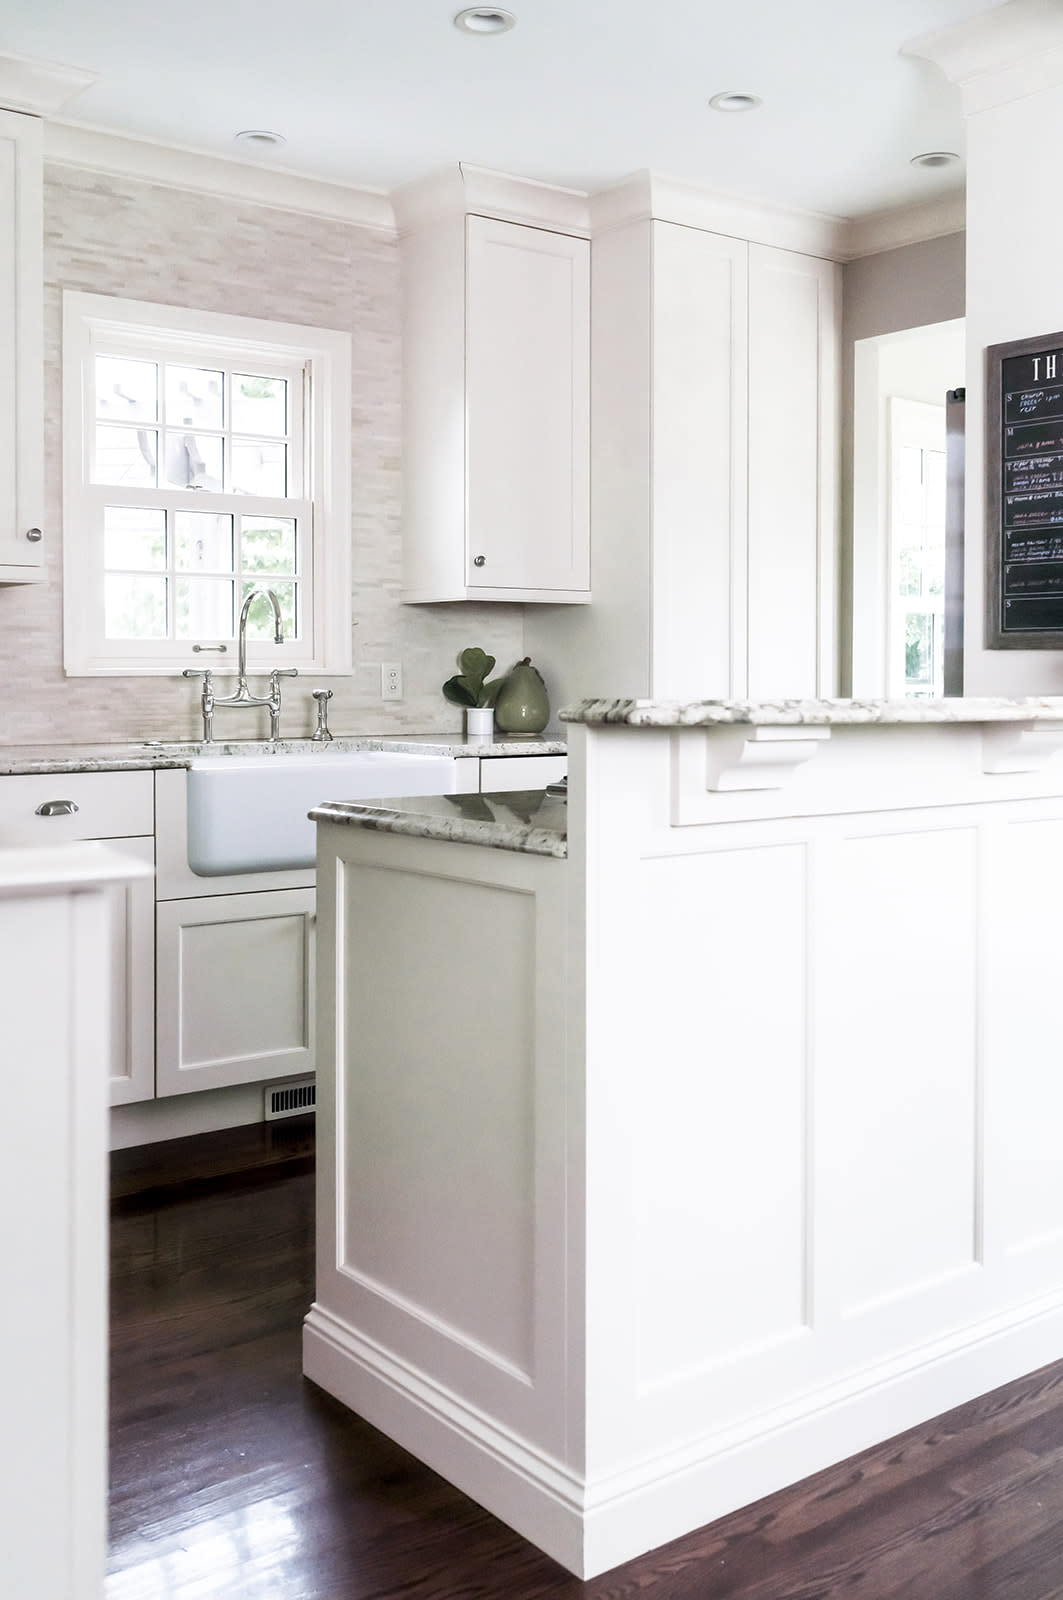 5 Things That Don't Belong On Your Kitchen Counters—And 3 That Do!